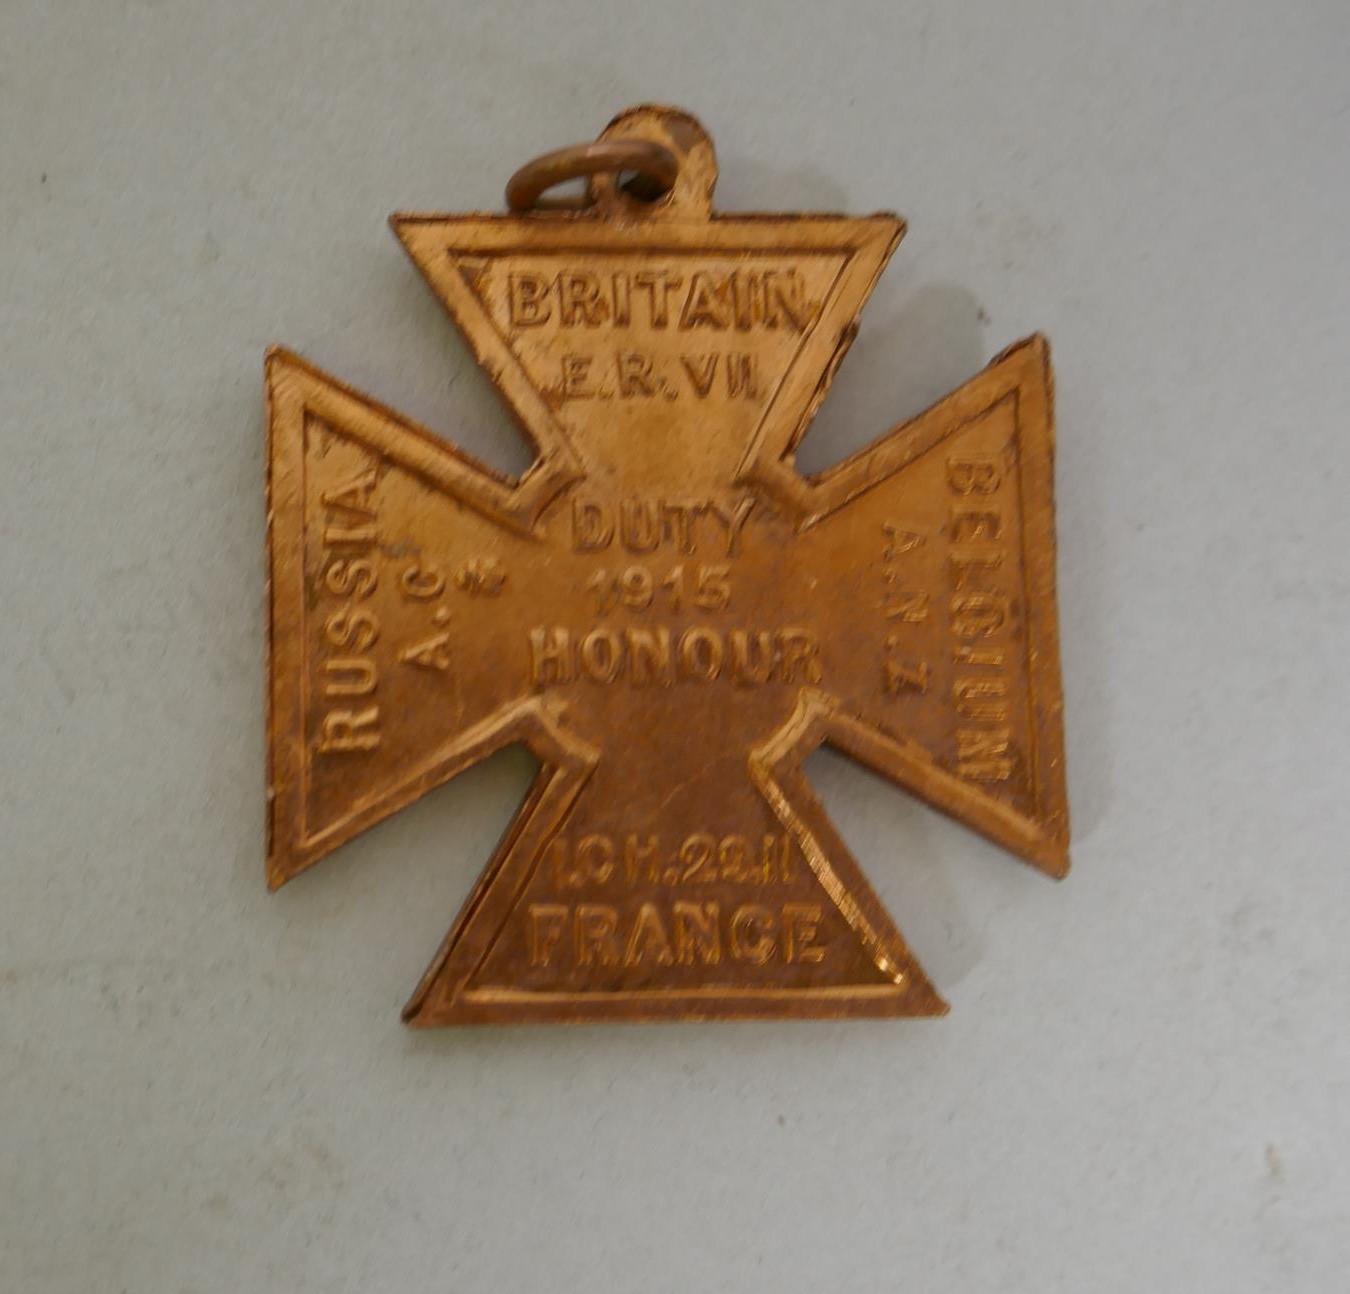 Admiral Lord Nelson memorabilia, a souvenir medal from the British and Foreign Sailor's Society, - Image 3 of 5